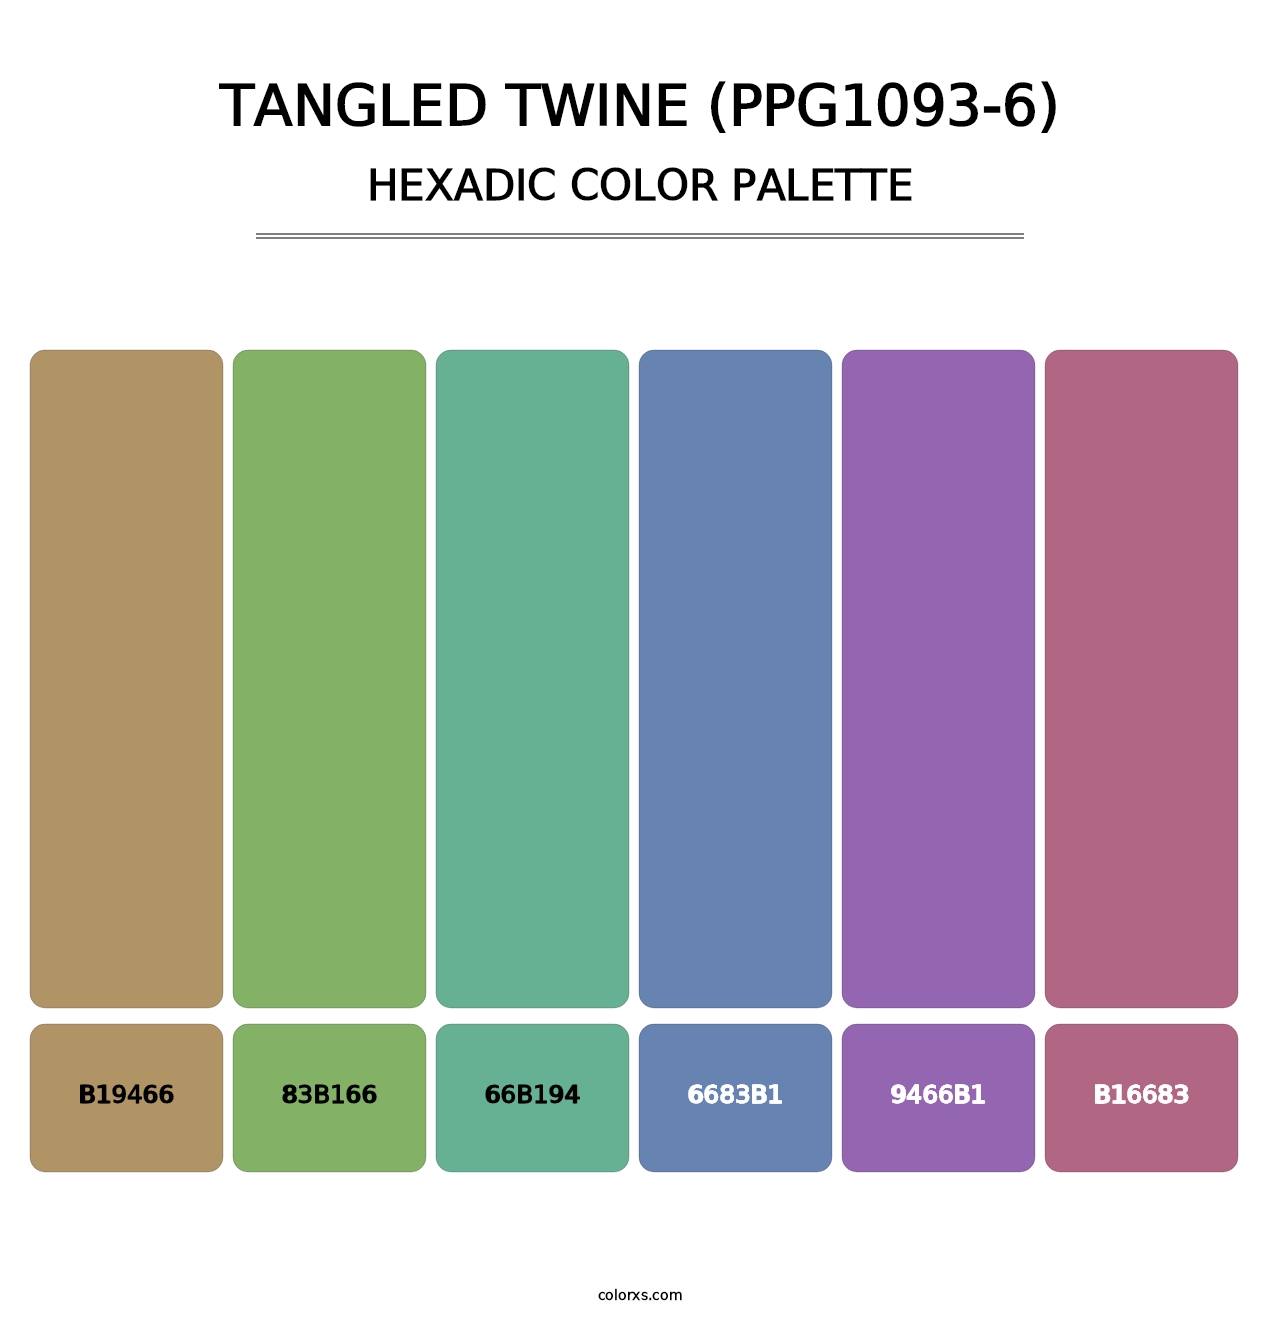 Tangled Twine (PPG1093-6) - Hexadic Color Palette